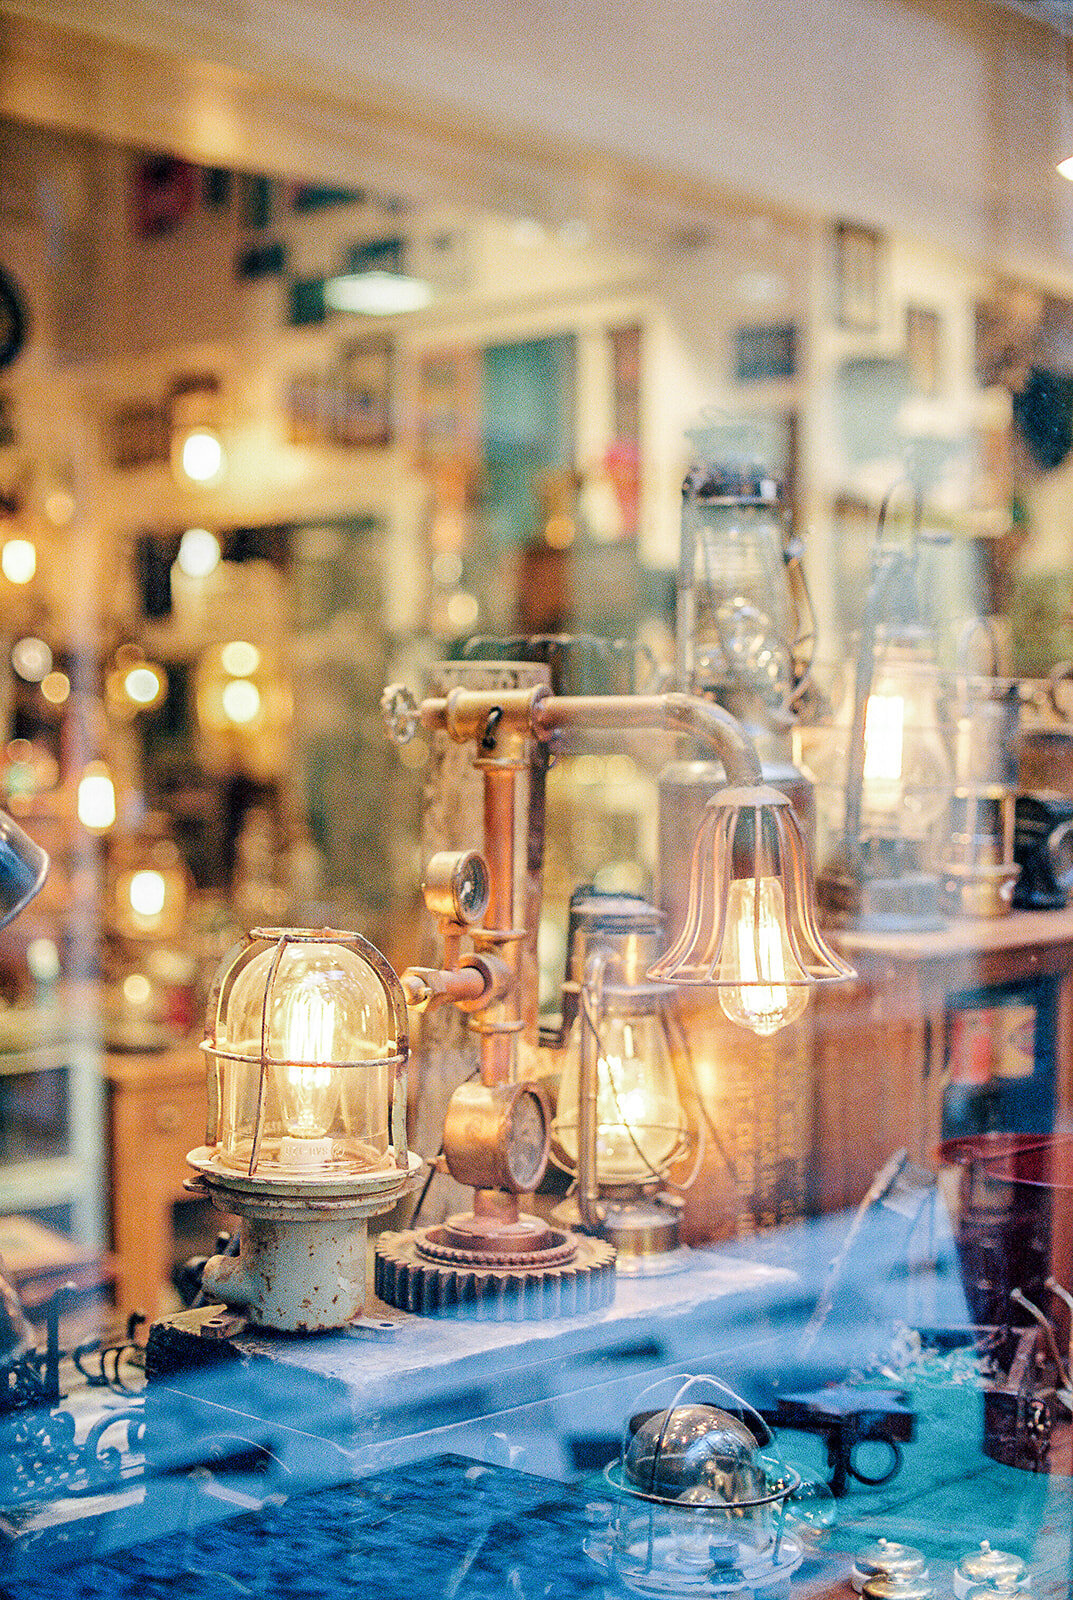 Film photograph of vintage lamps in an antique shop window in Paris France photographed by Fine Art Film Photographer